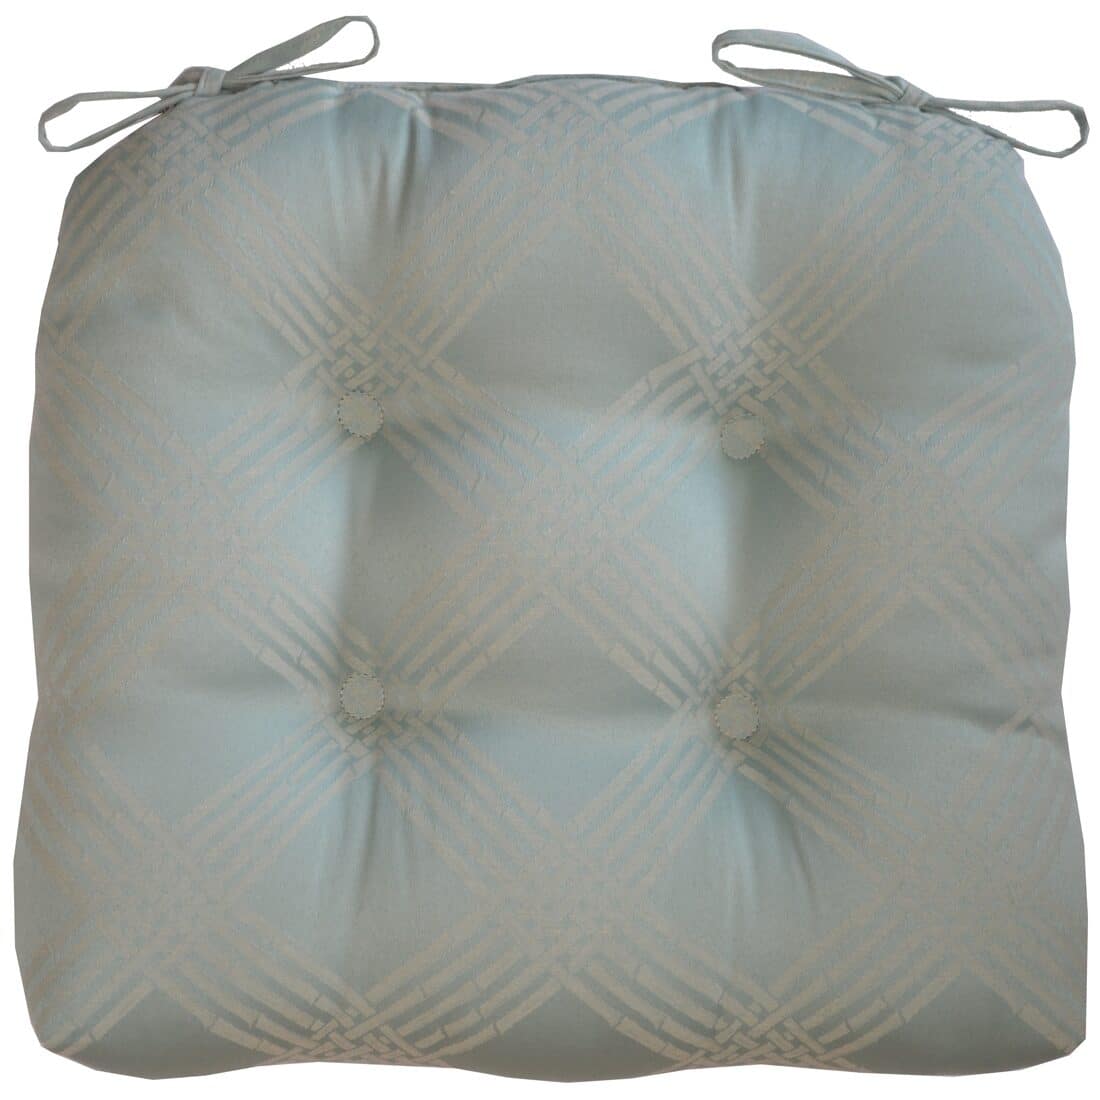 Sweet Pea Linens - Light Blue/Green Lattice Jacquard Chair Cushion Pads - Set of Two (SKU#: RS2-1014-L23) - Main Product Image